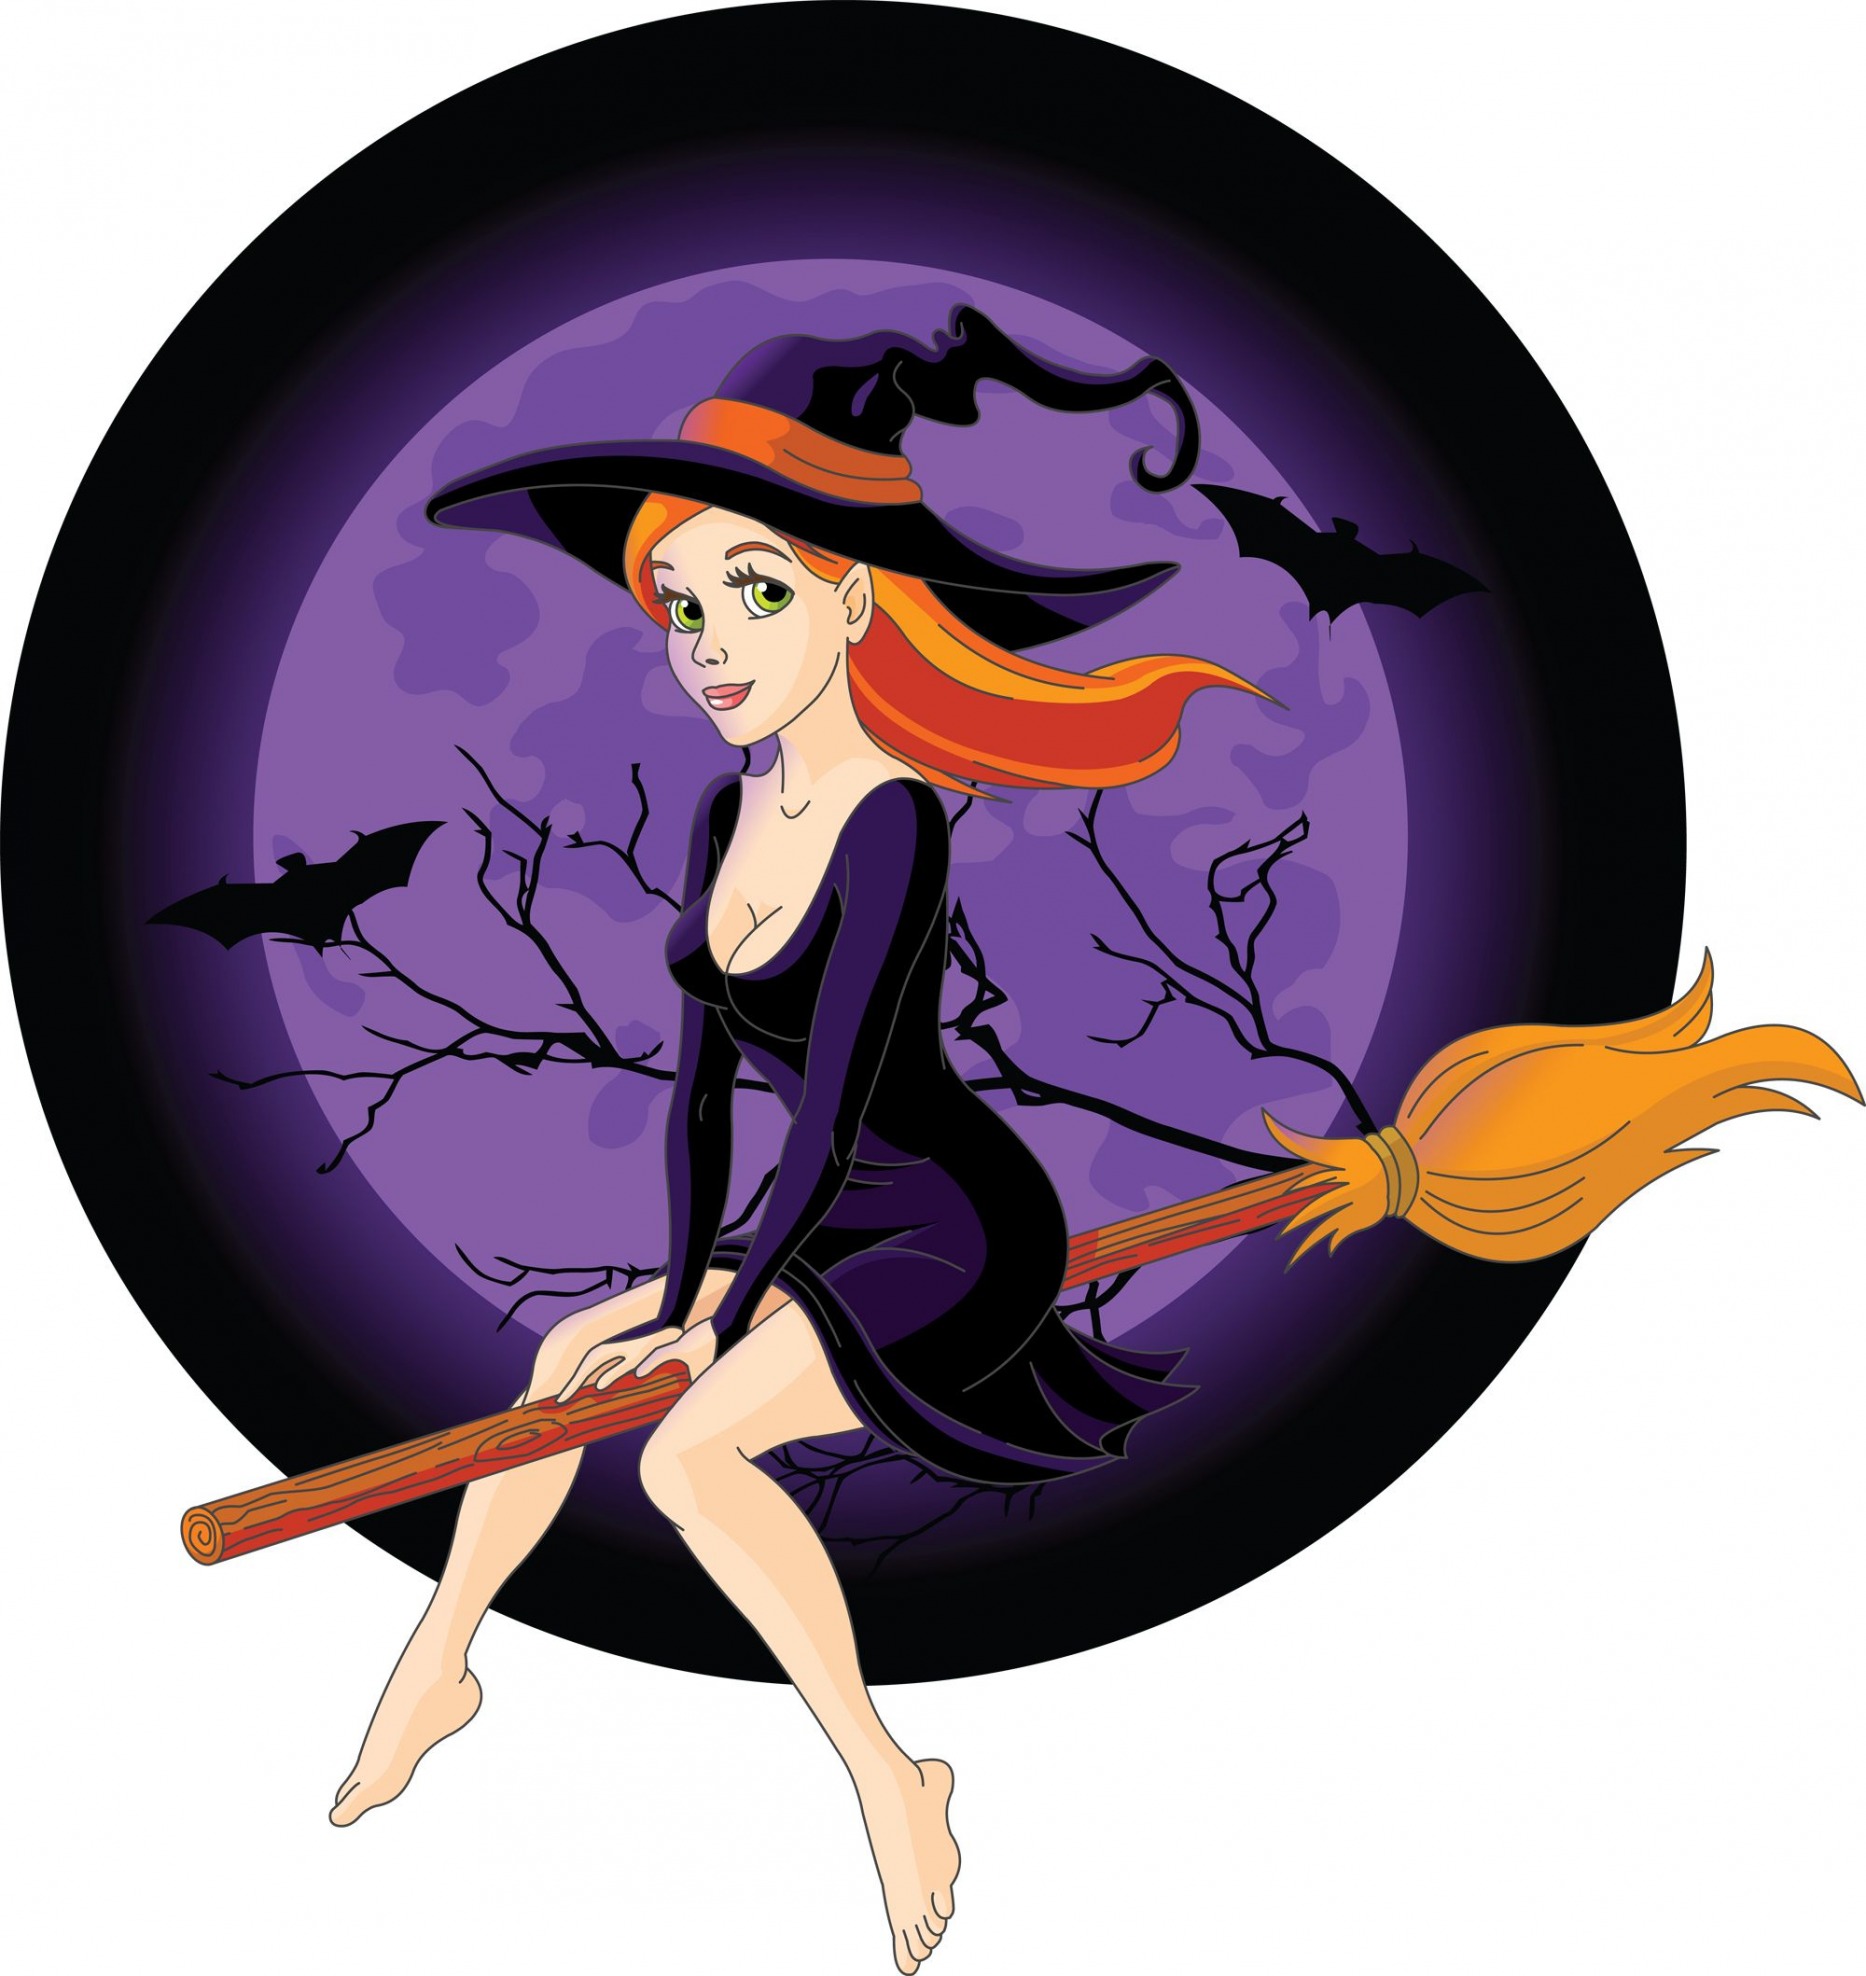 No "Sexy Witch Redhead" memes have been featured yet. 